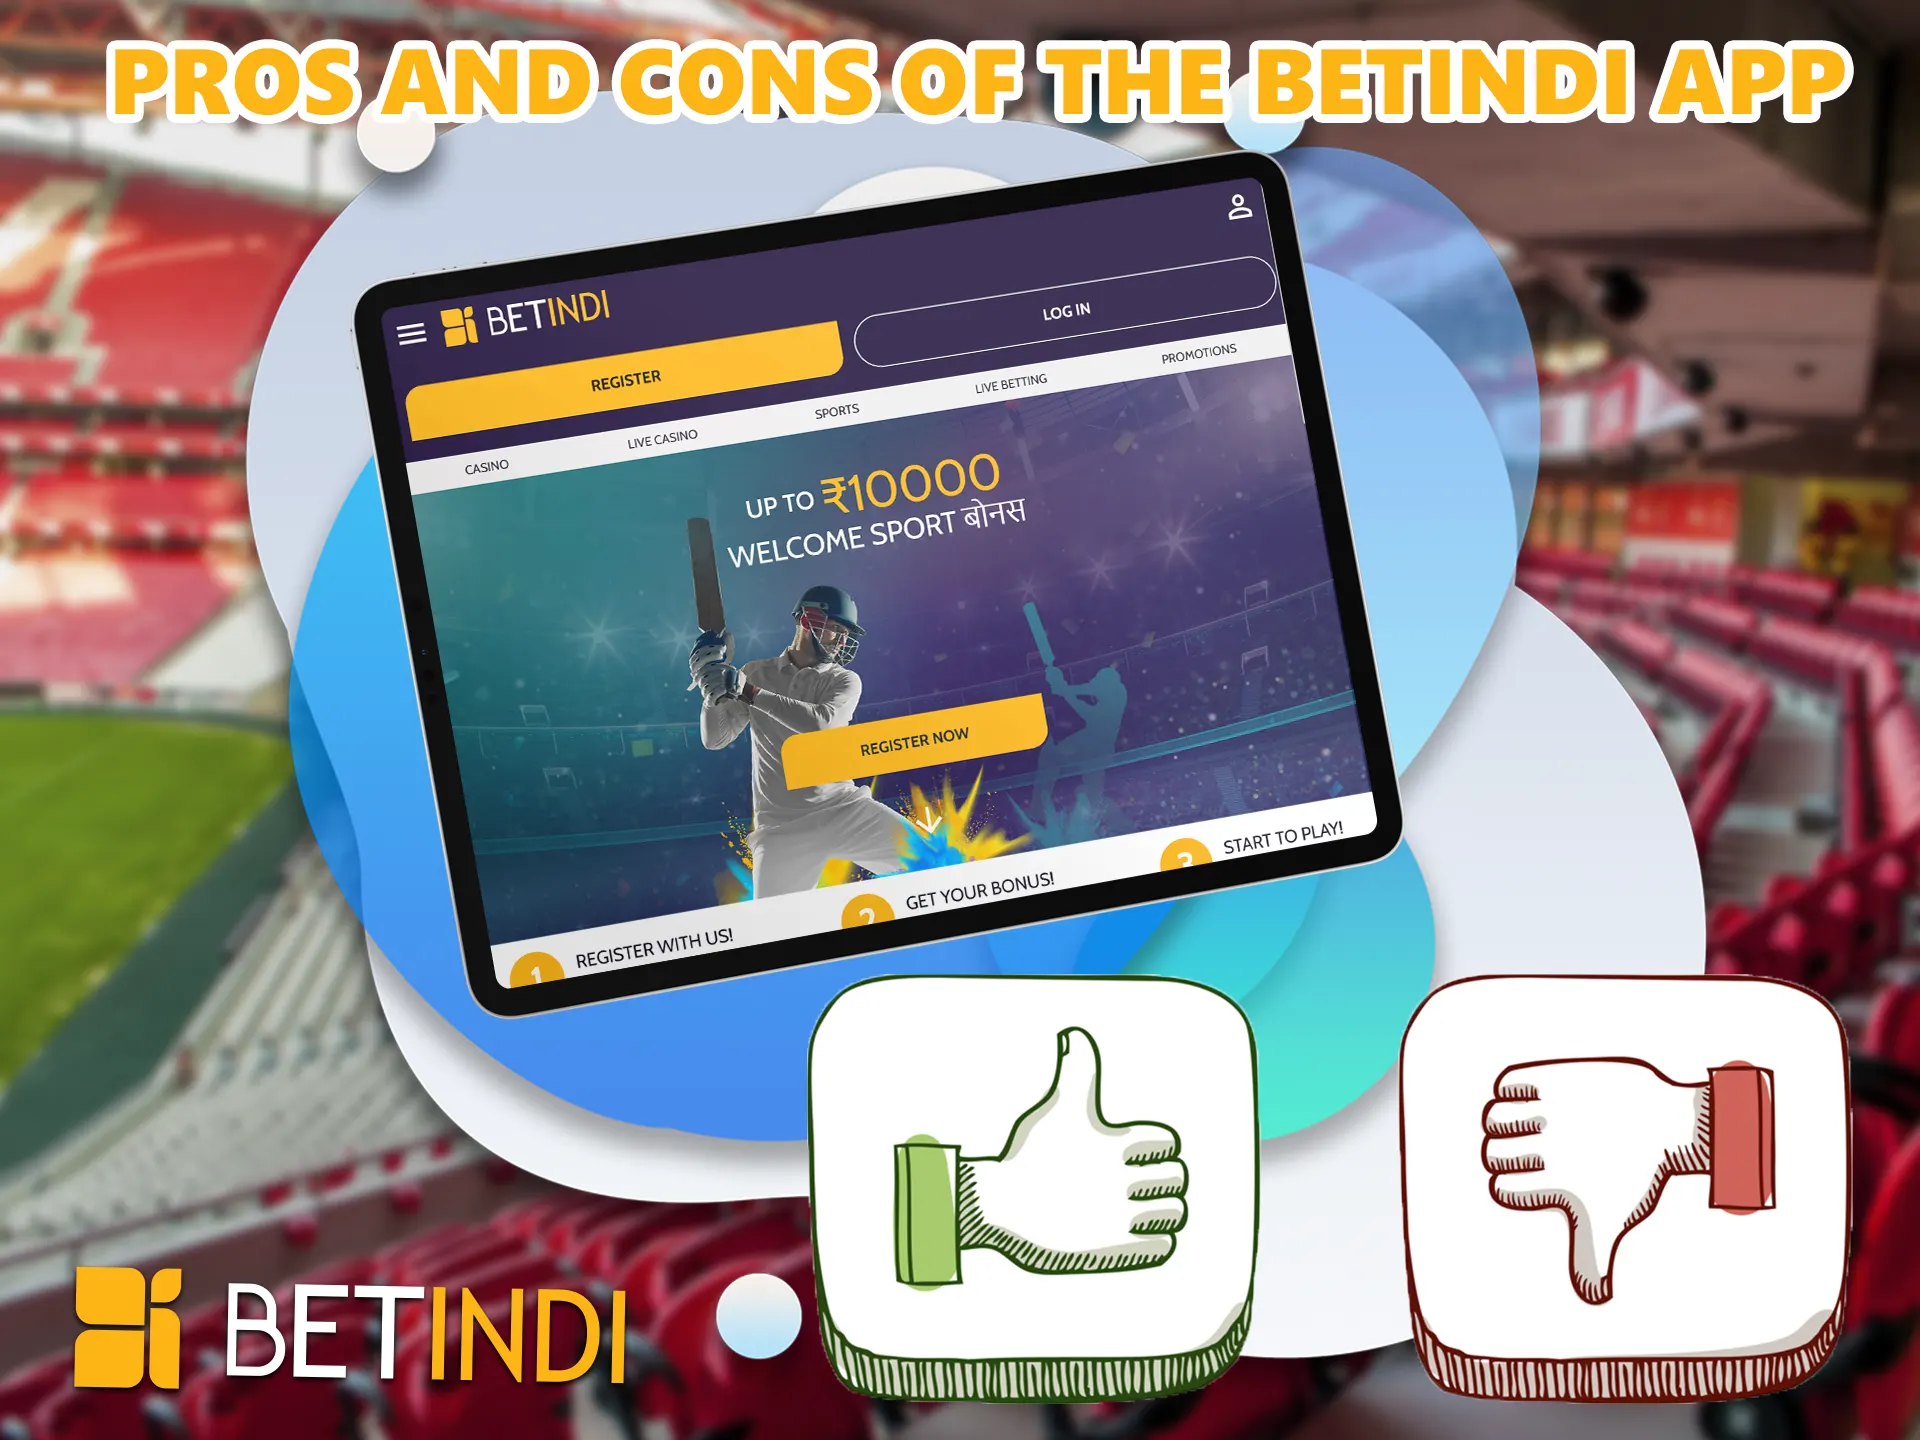 Learn about the benefits of the BetIndi mobile app.